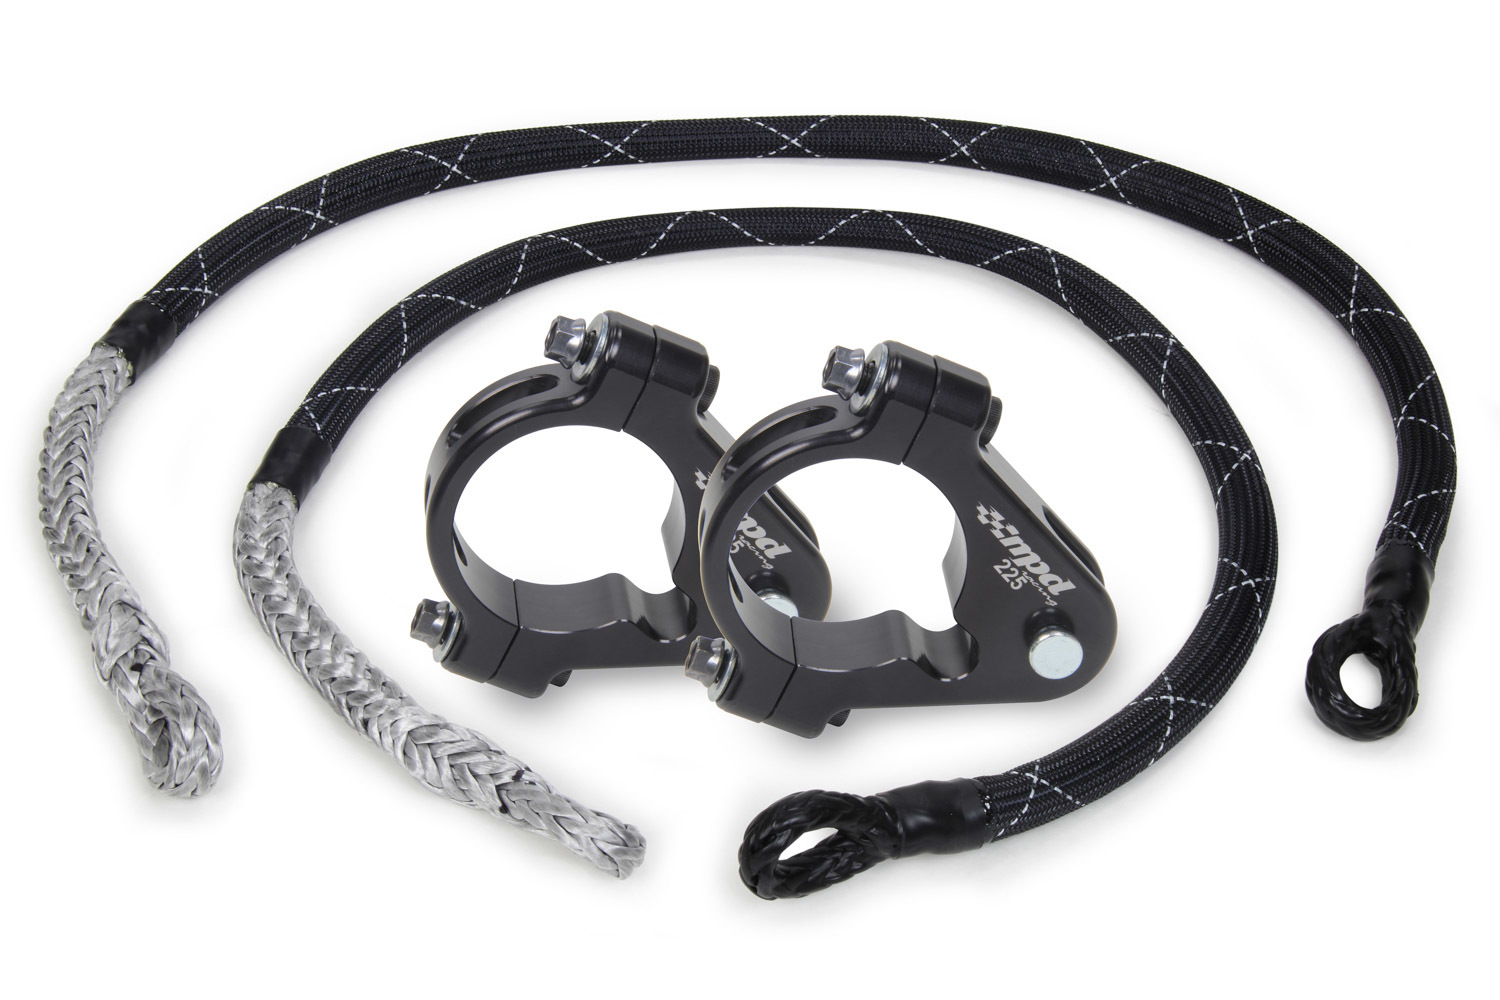 MPD Racing 10502 Axle Tether, Clamp / Hardware Included, Aluminum, Black Anodized, 2-1/4 in Axle Tube, Kit